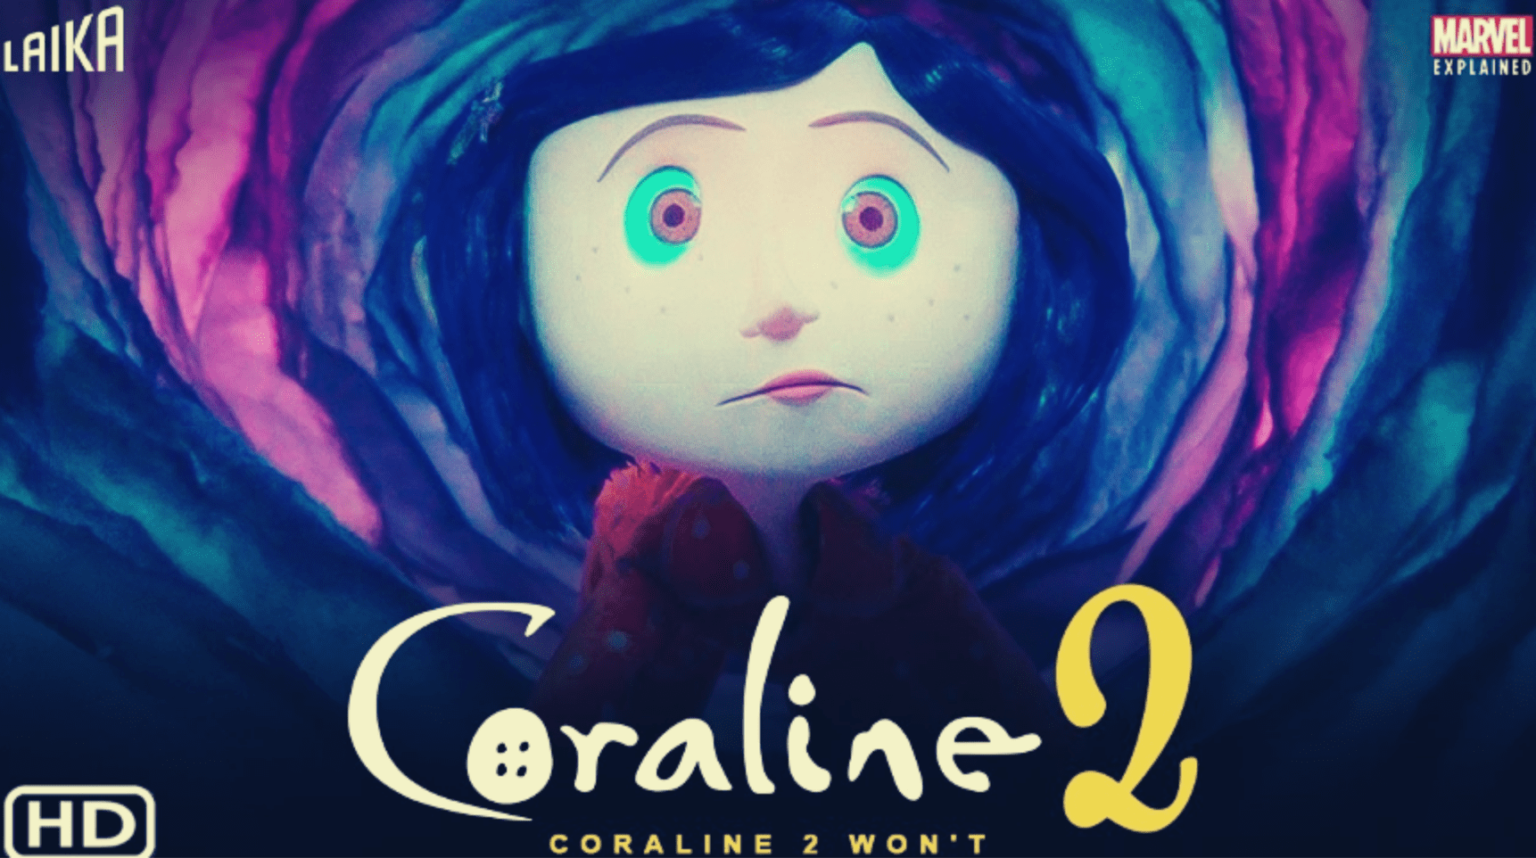 Coraline 2 When is it coming out?